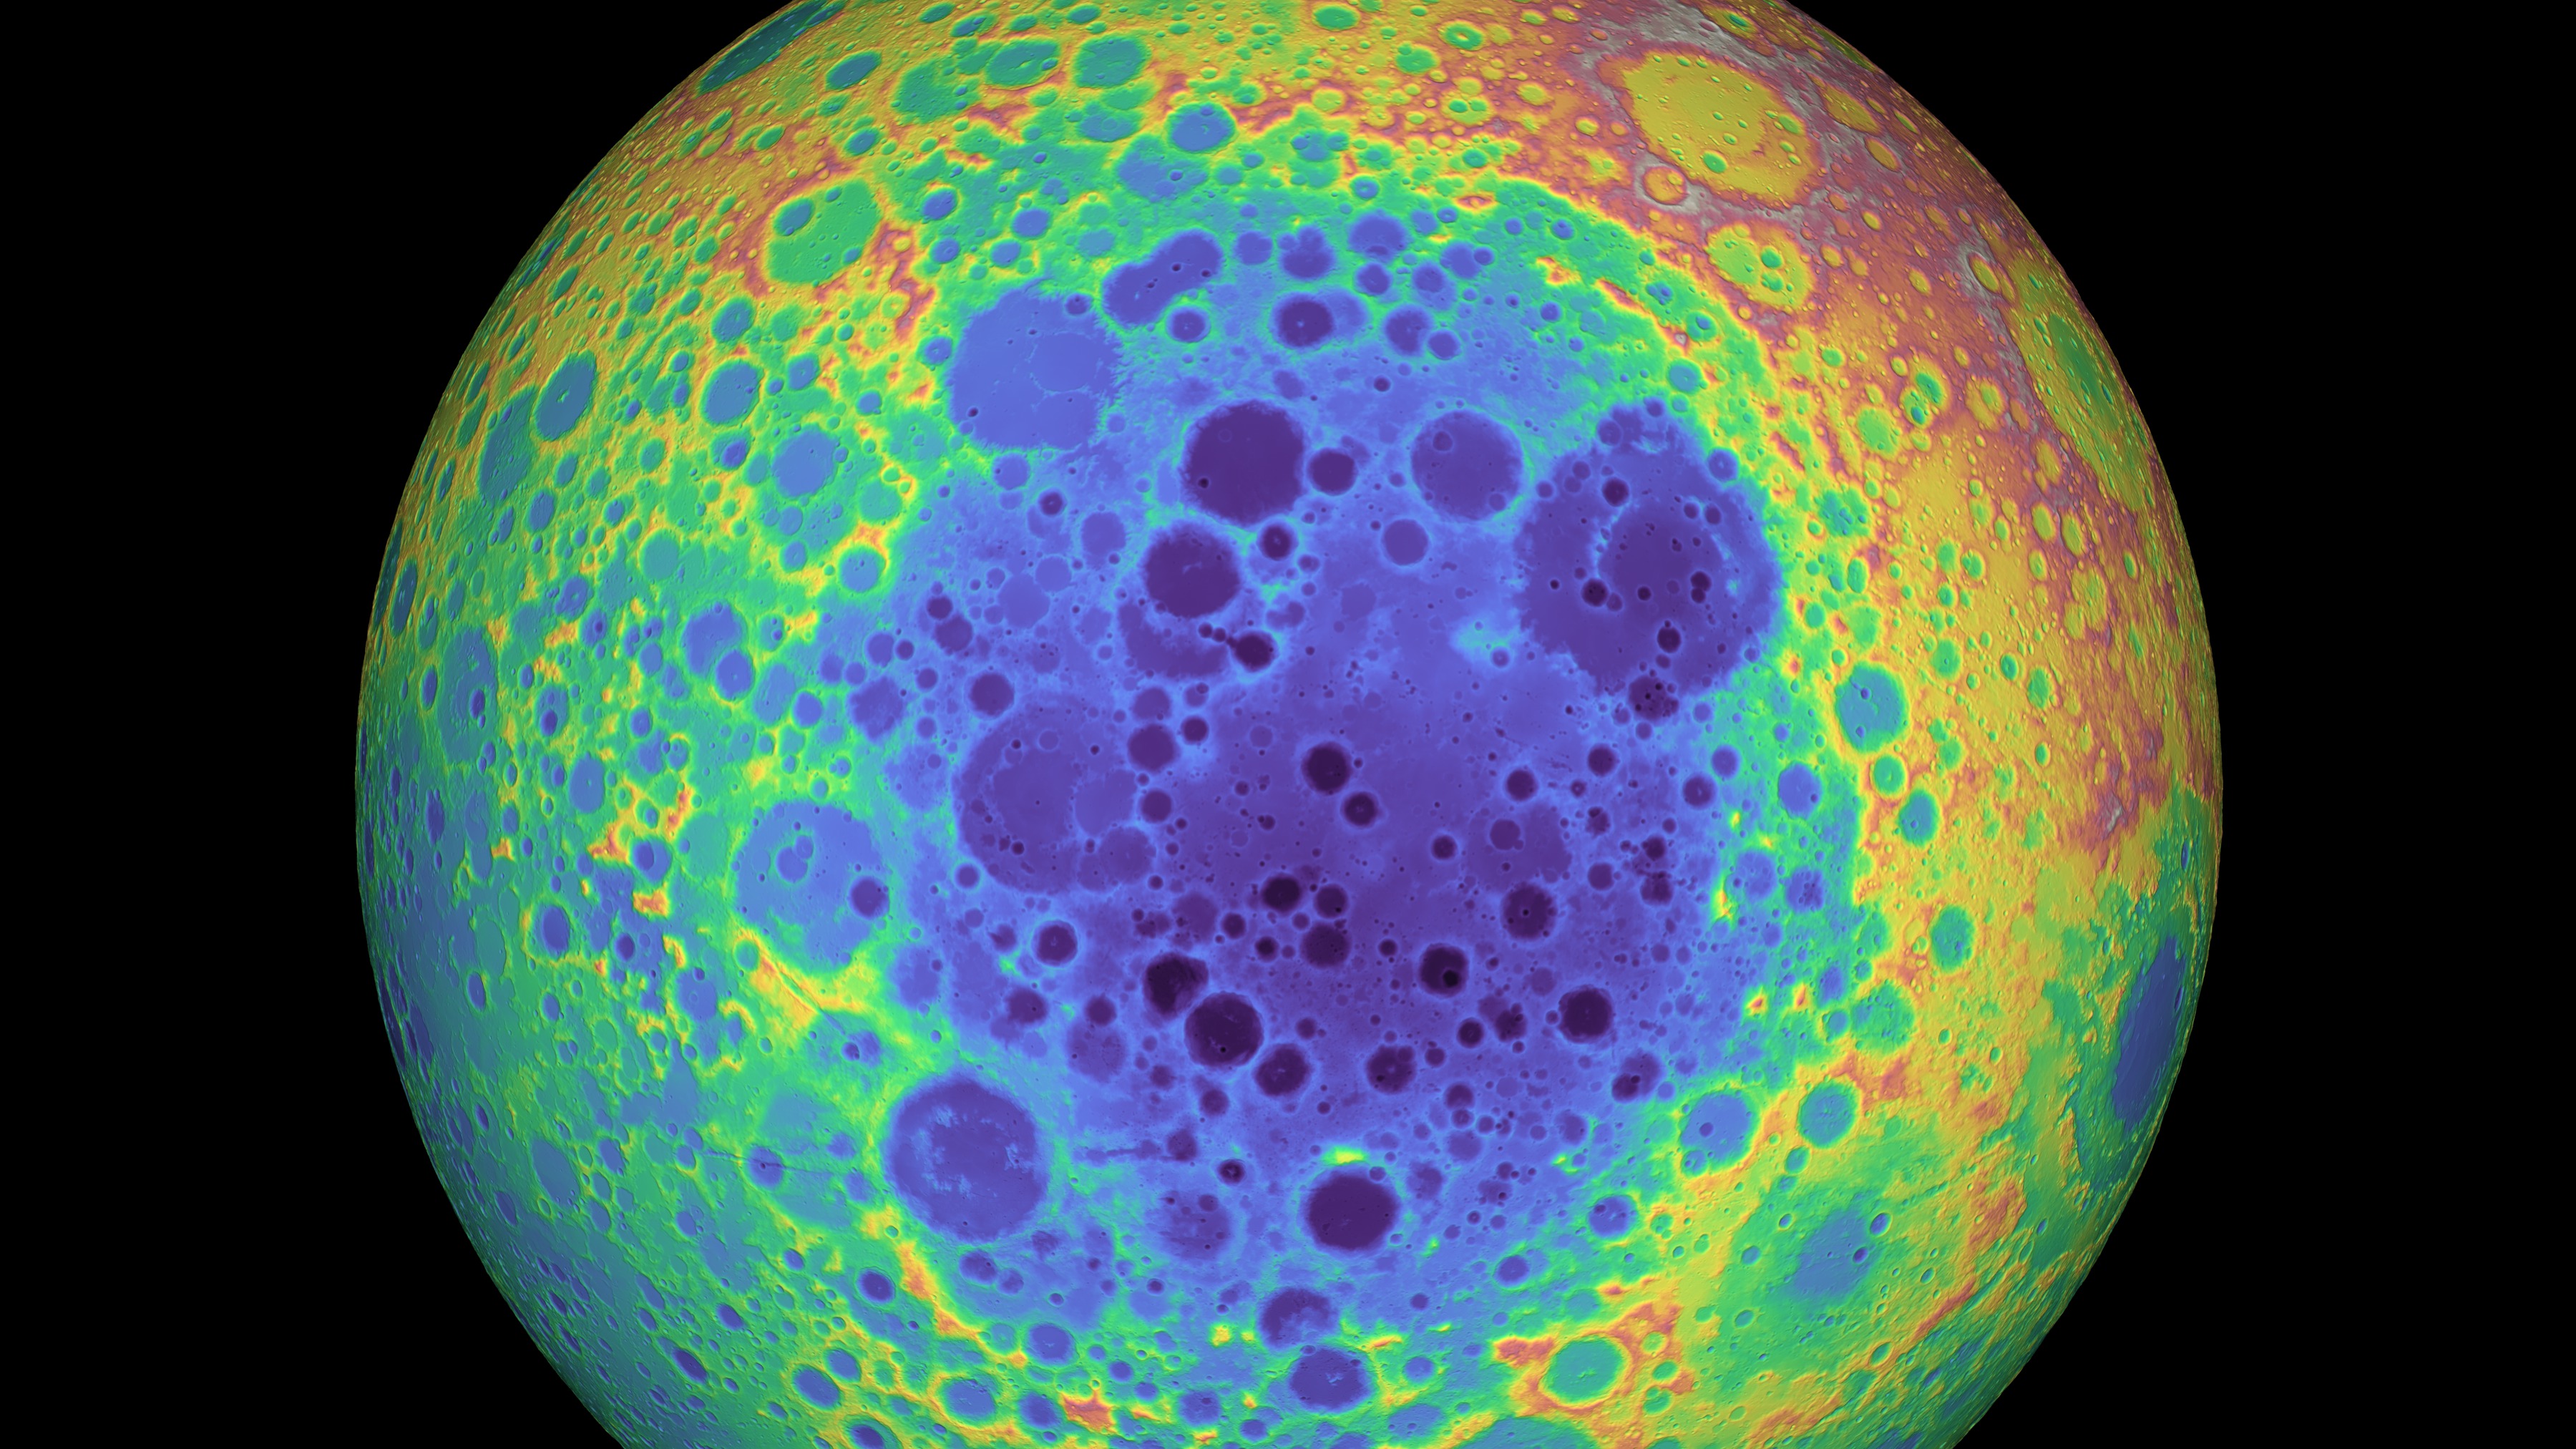 Color enhanced image showing massive impact region on the Moon.